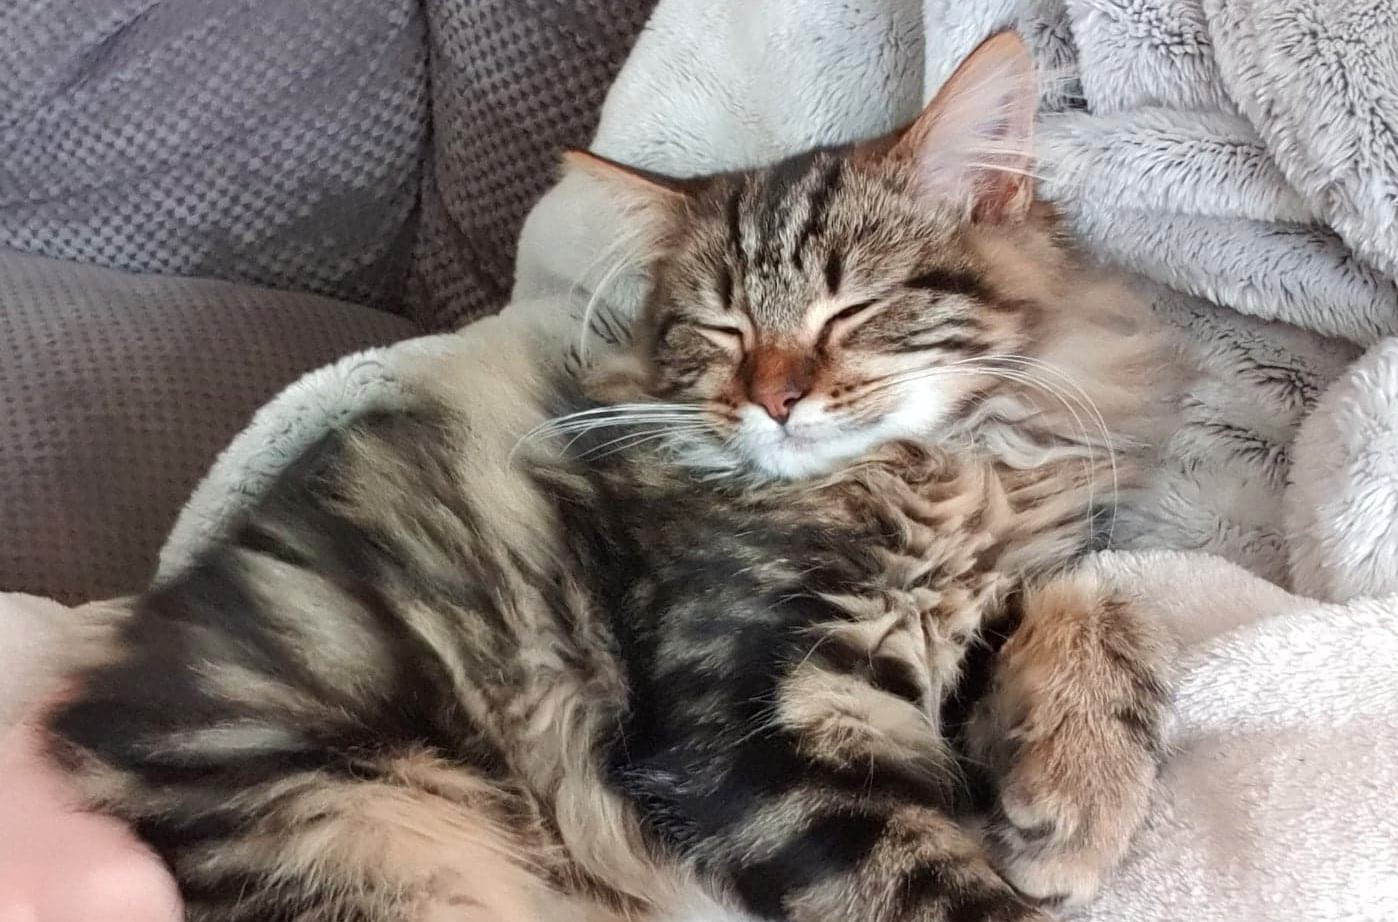 Sleeping adopted tabby cat curled up in dressing gown arm